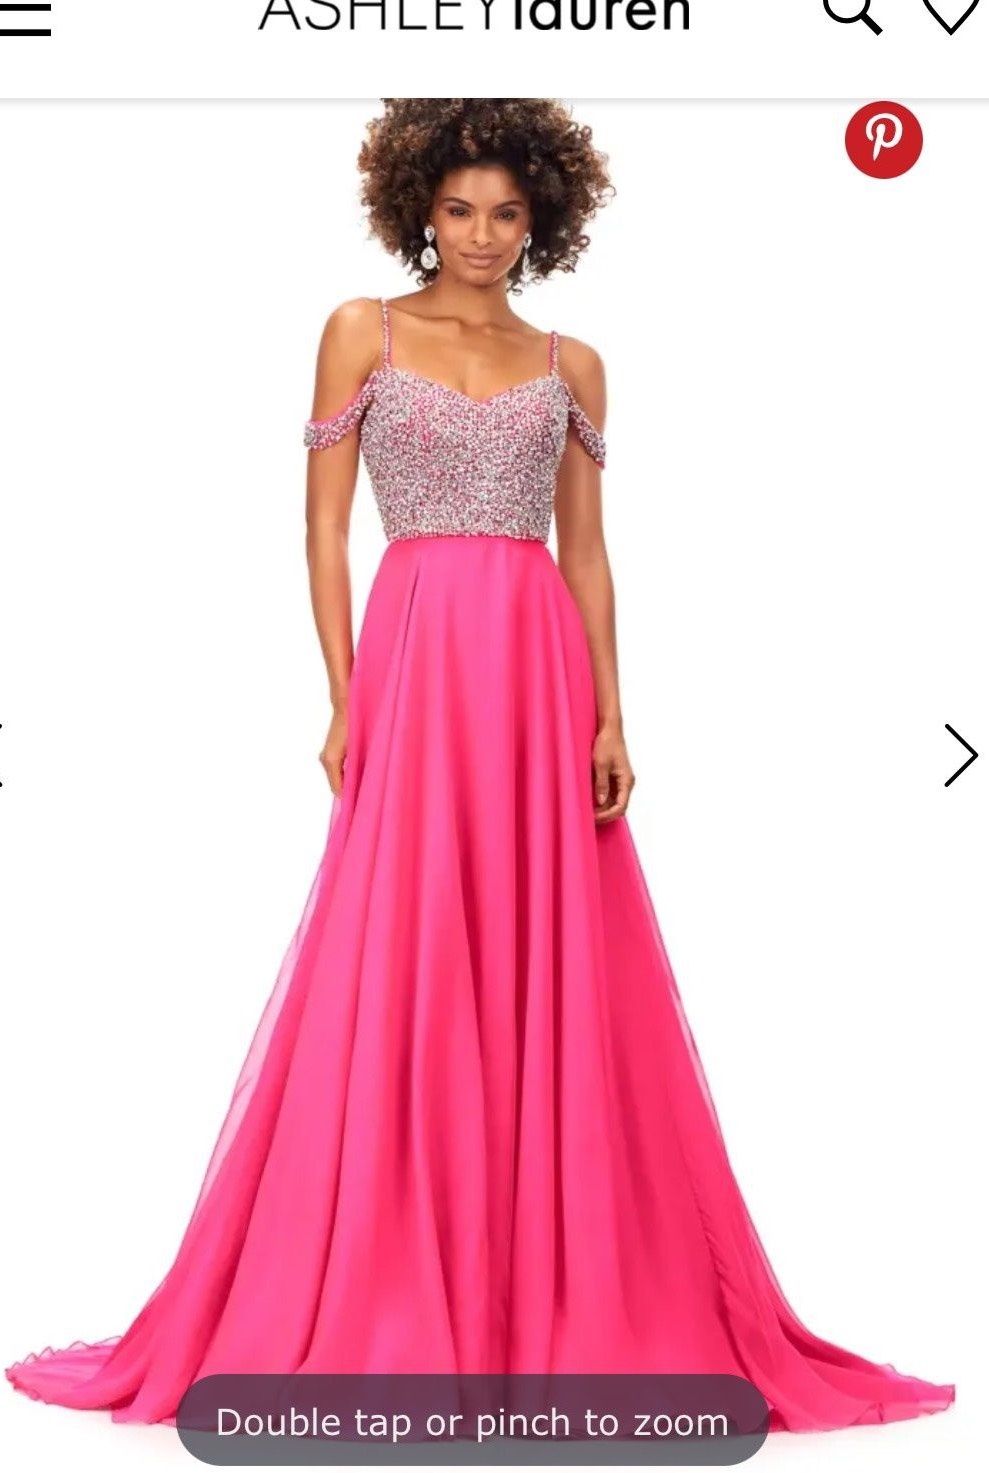 Style 11253 Ashley Lauren Size 12 Prom Off The Shoulder Pink A-line Dress on Queenly